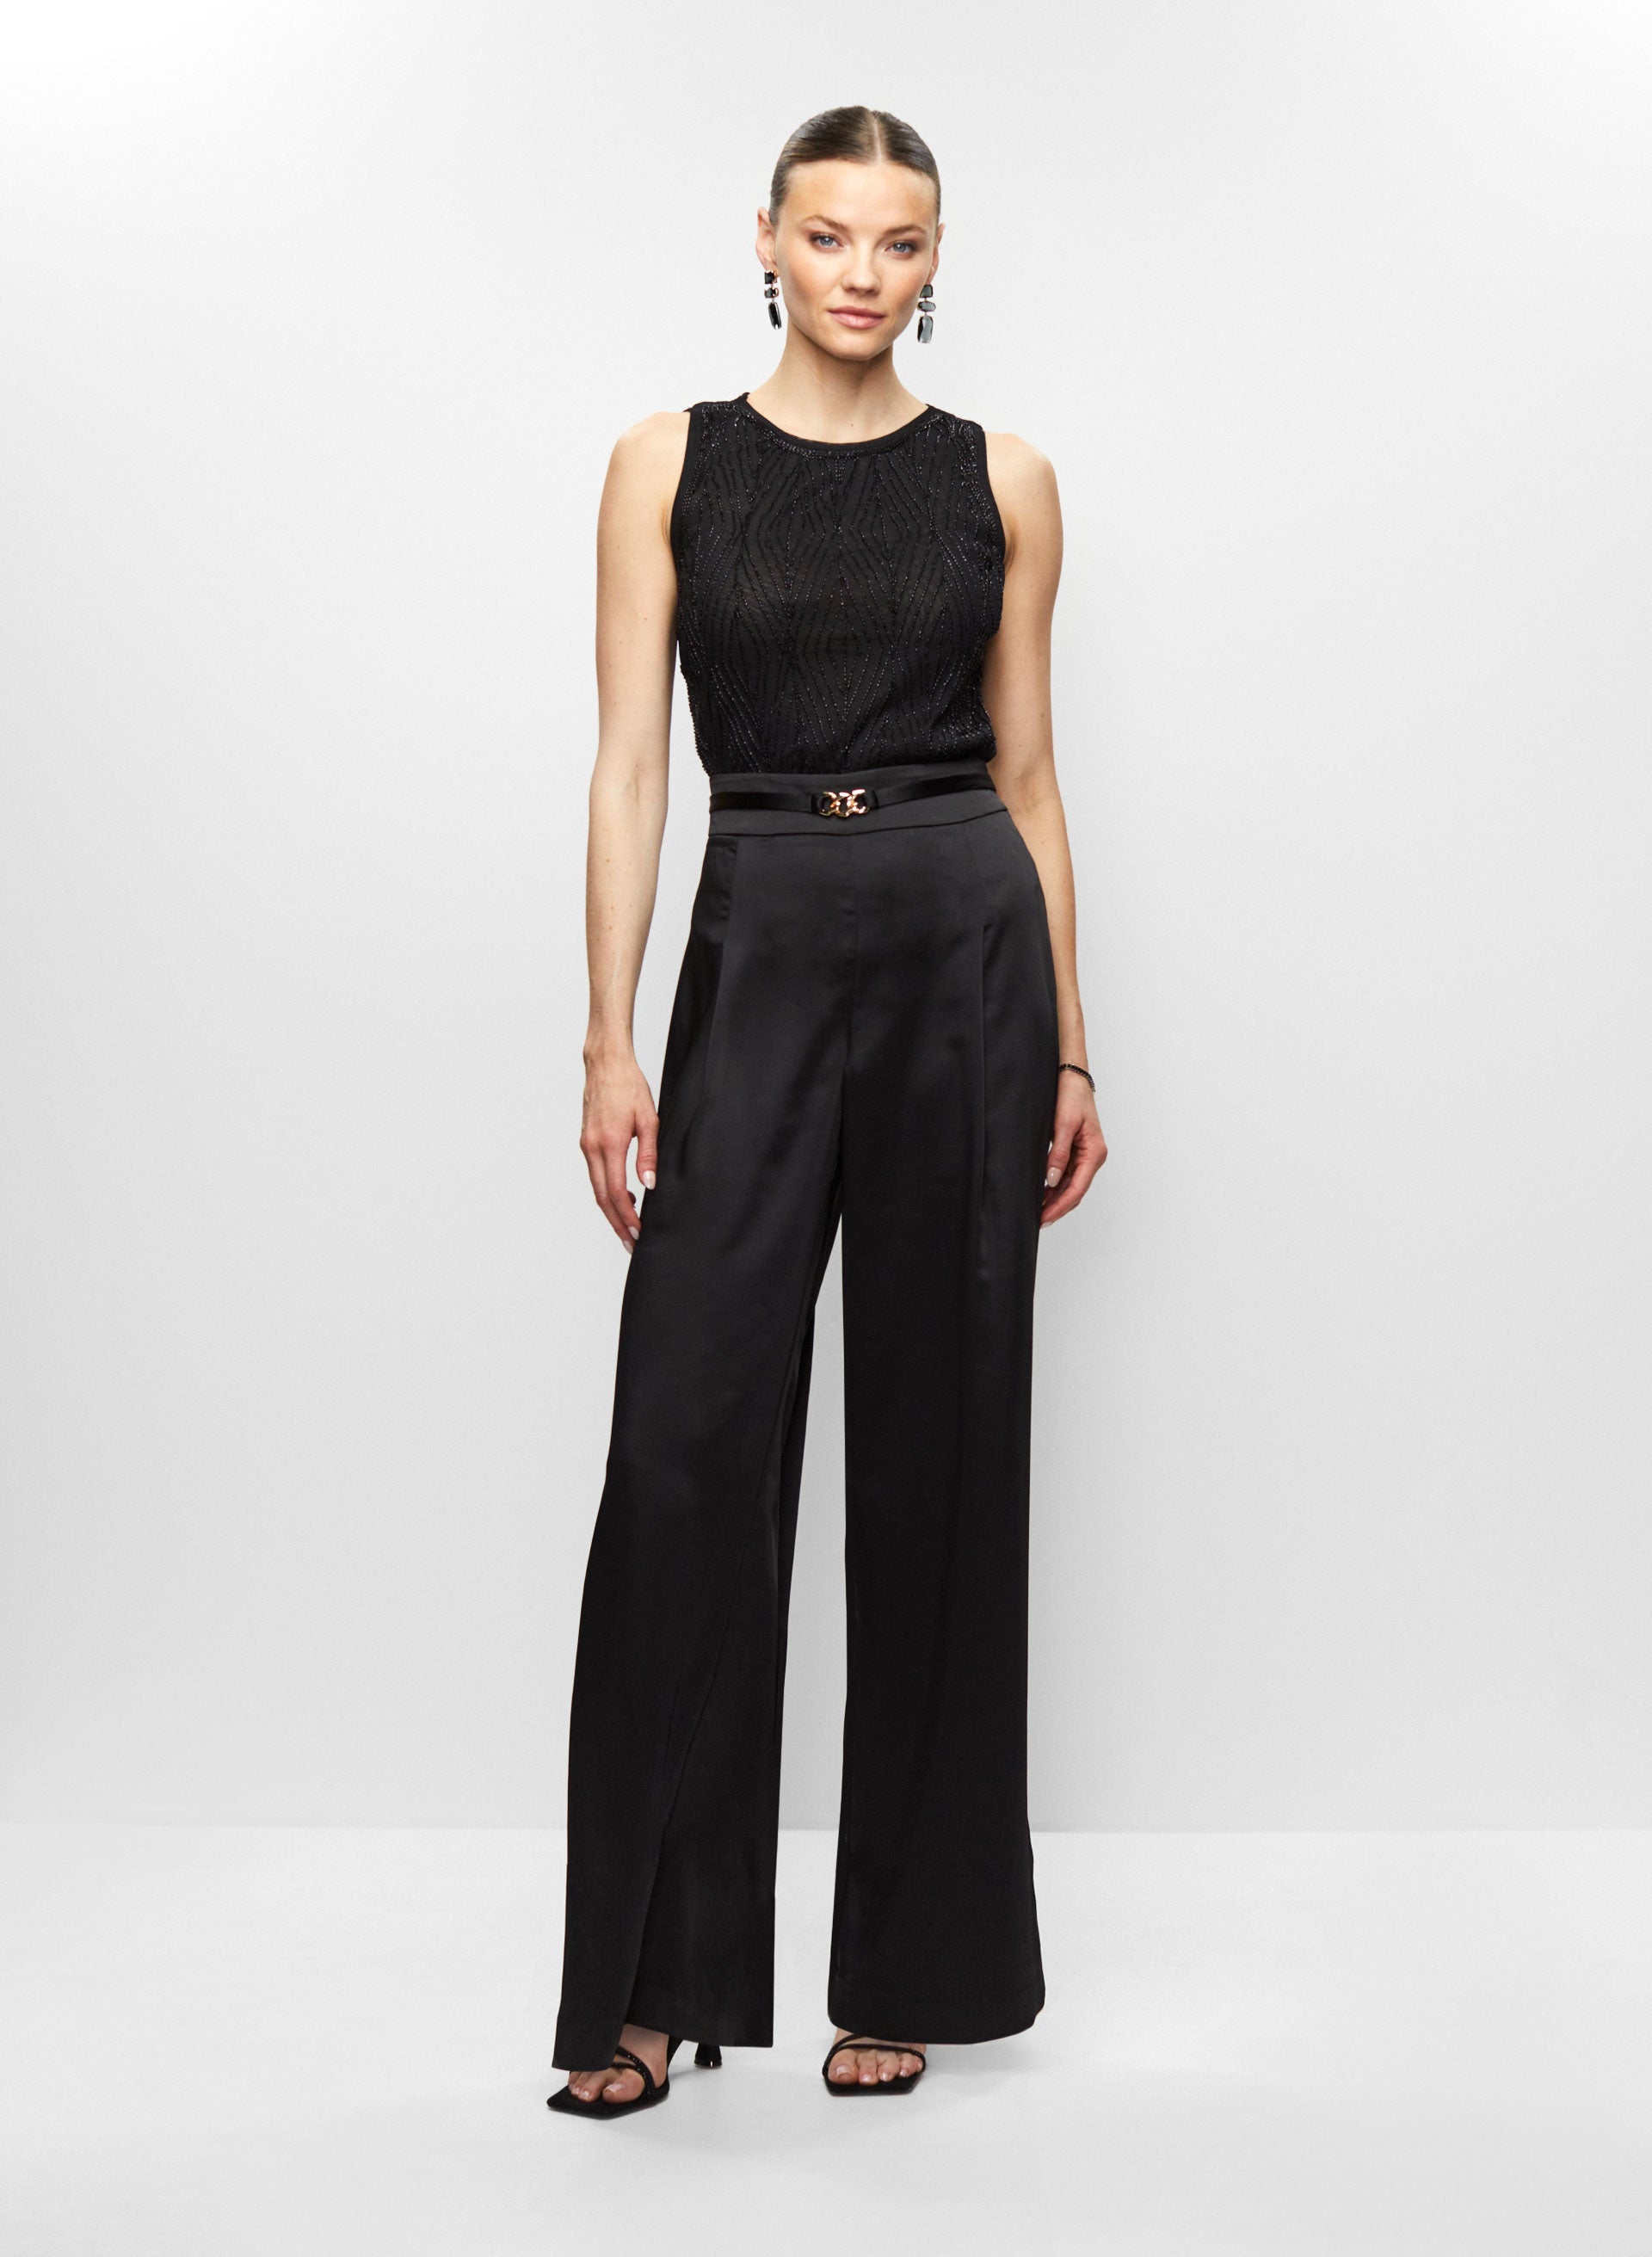 Beaded Top & Belted Pants